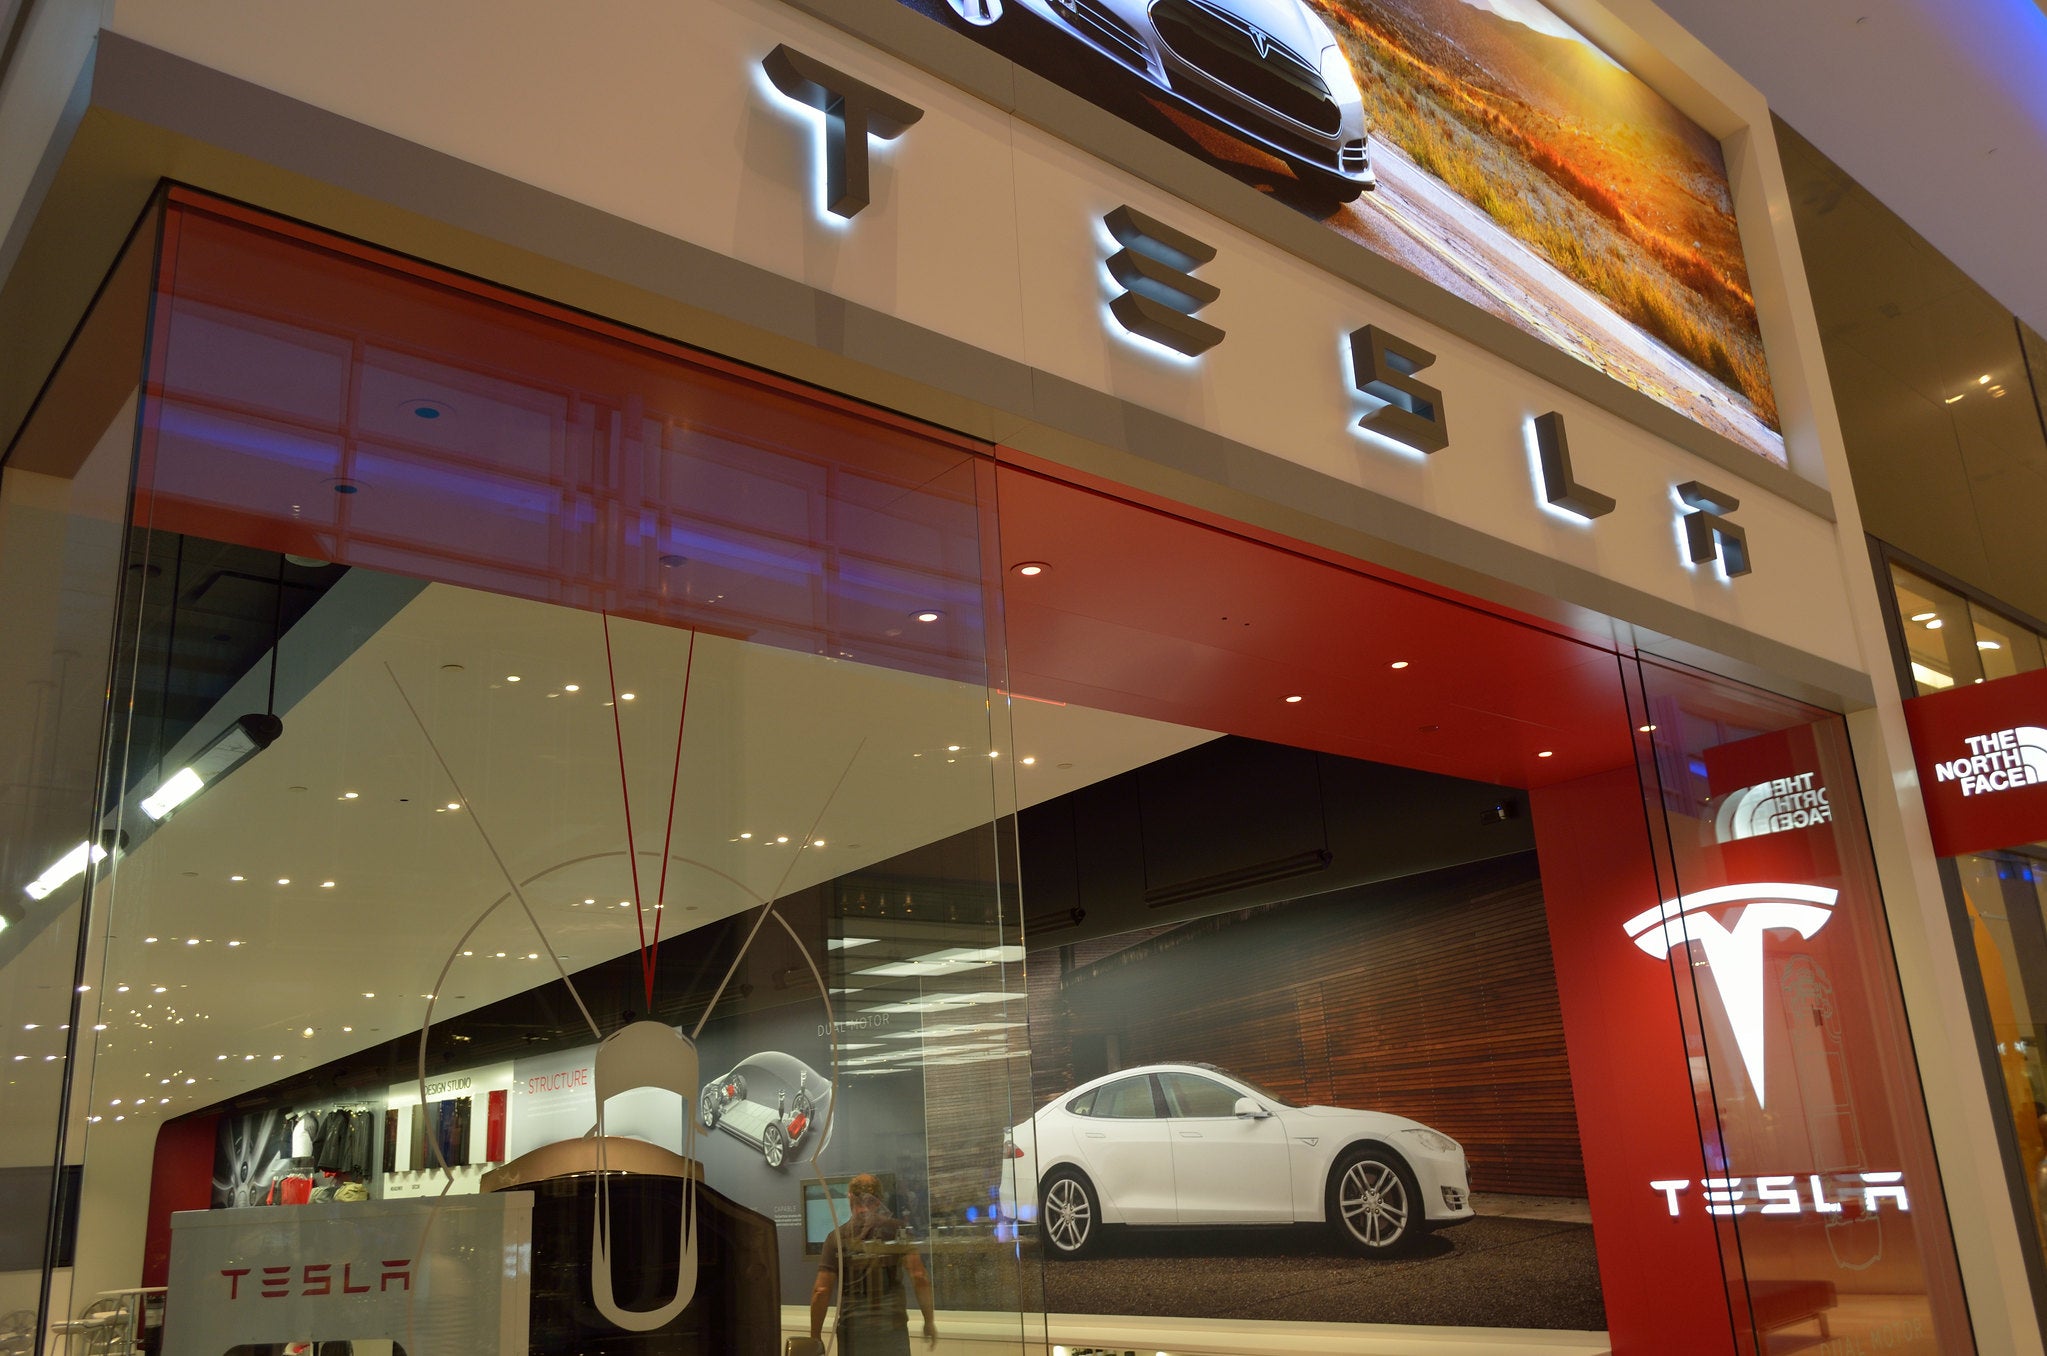 Tesla (TSLA) Reaches $224B Market Cap, Inclusion In The S&P 500 Might Be In the Horizon